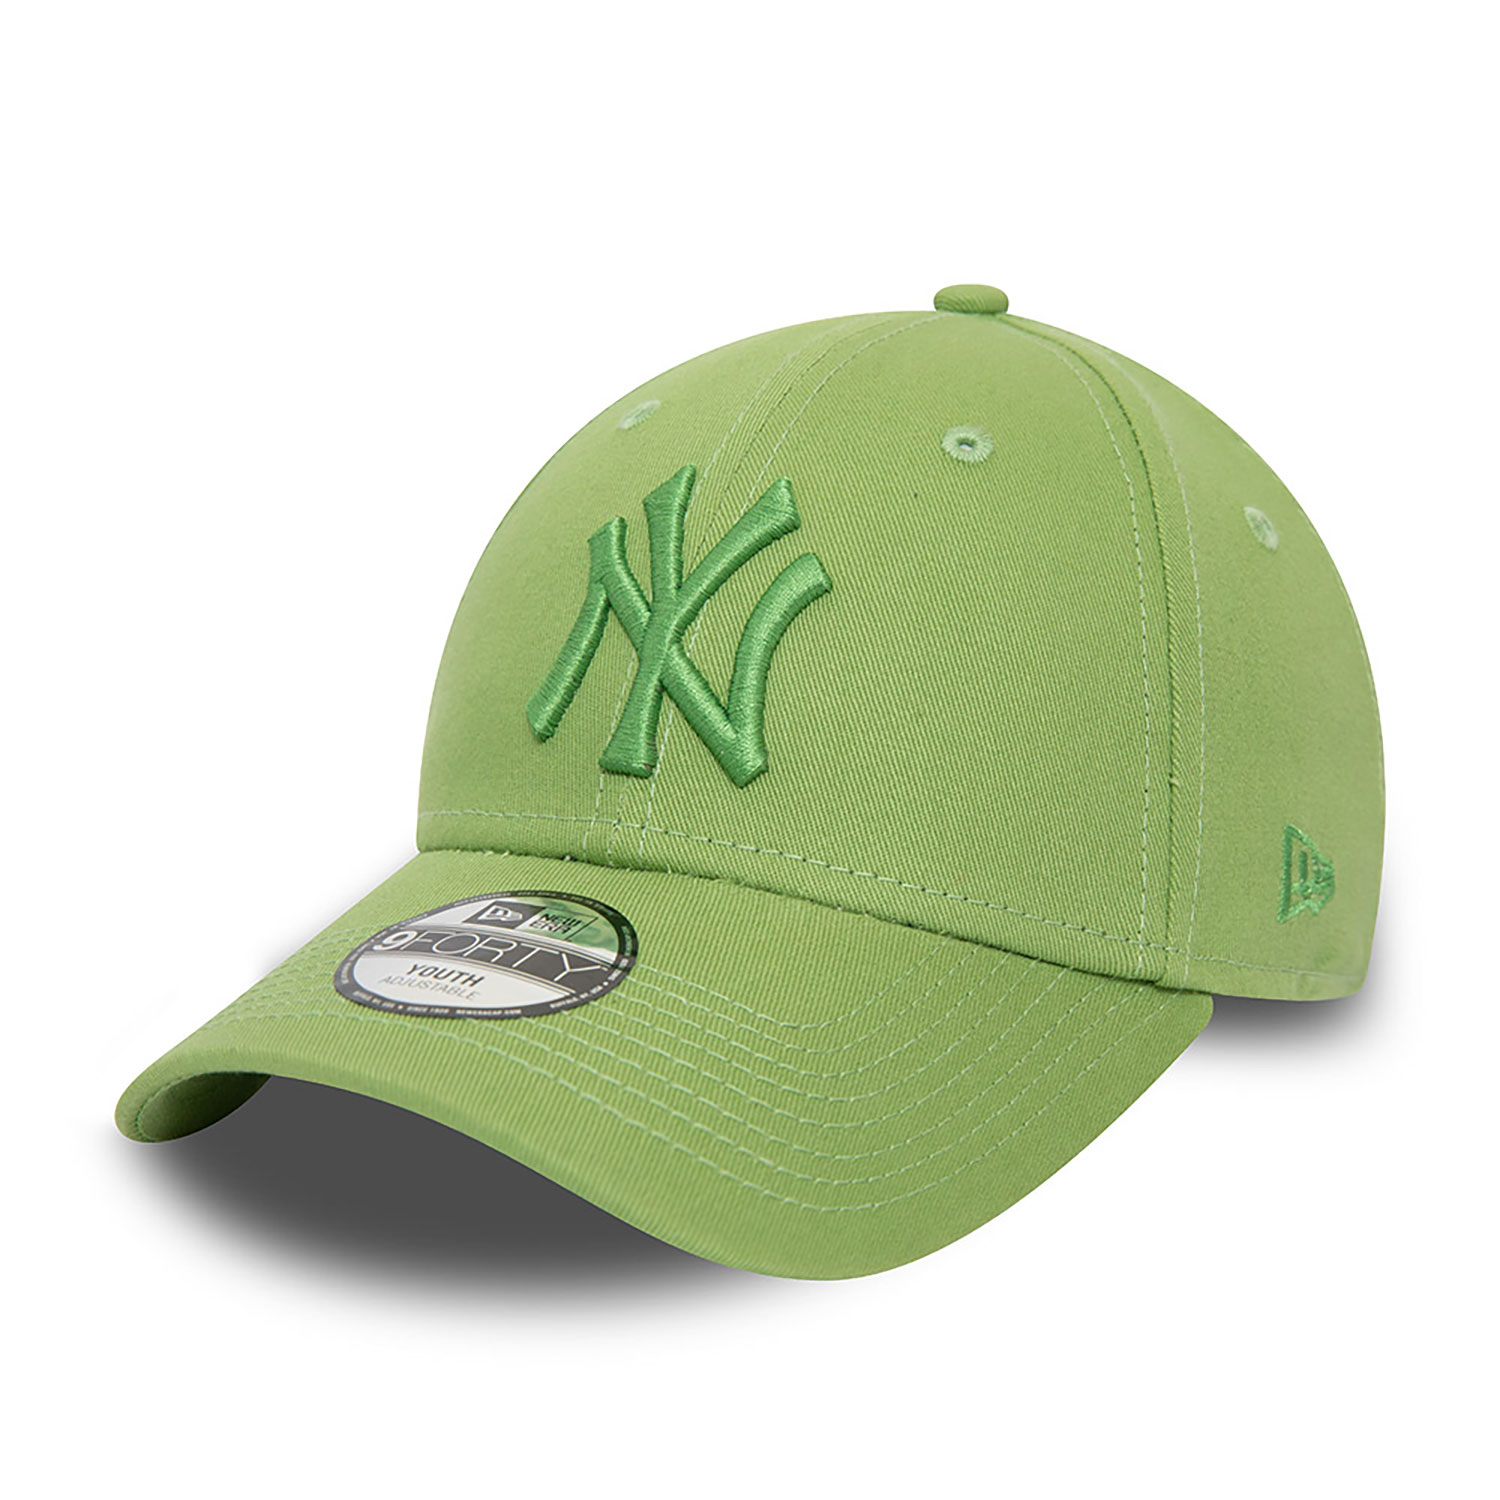 New York Yankees Youth League Essential Green 9FORTY Adjustable Cap